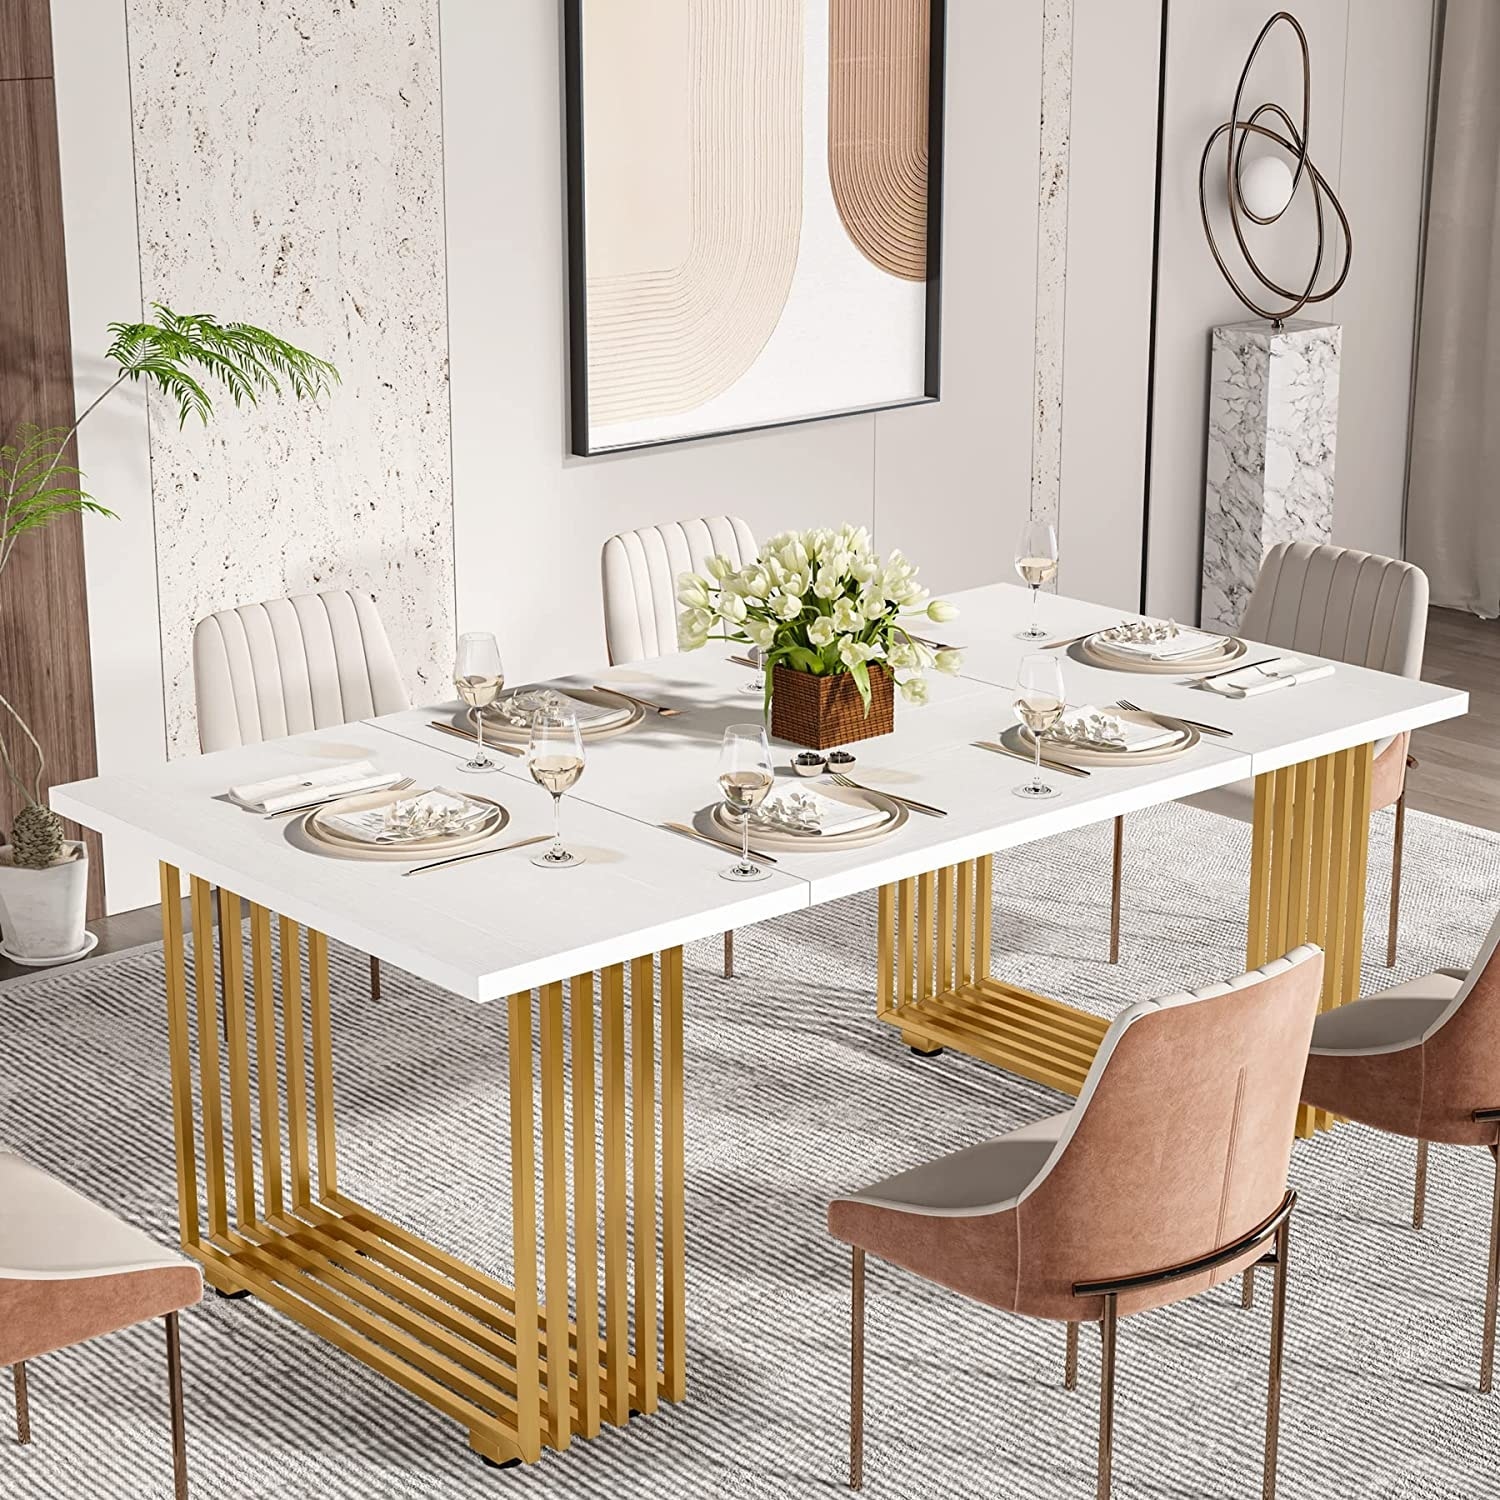 https://ak1.ostkcdn.com/images/products/is/images/direct/7d6b28e7ec67b24d7de4d4d85b169584b3239a48/Modern-Dining-Table-for-6-8-People%2C-70.8-Inches-White-Kitchen-Table.jpg